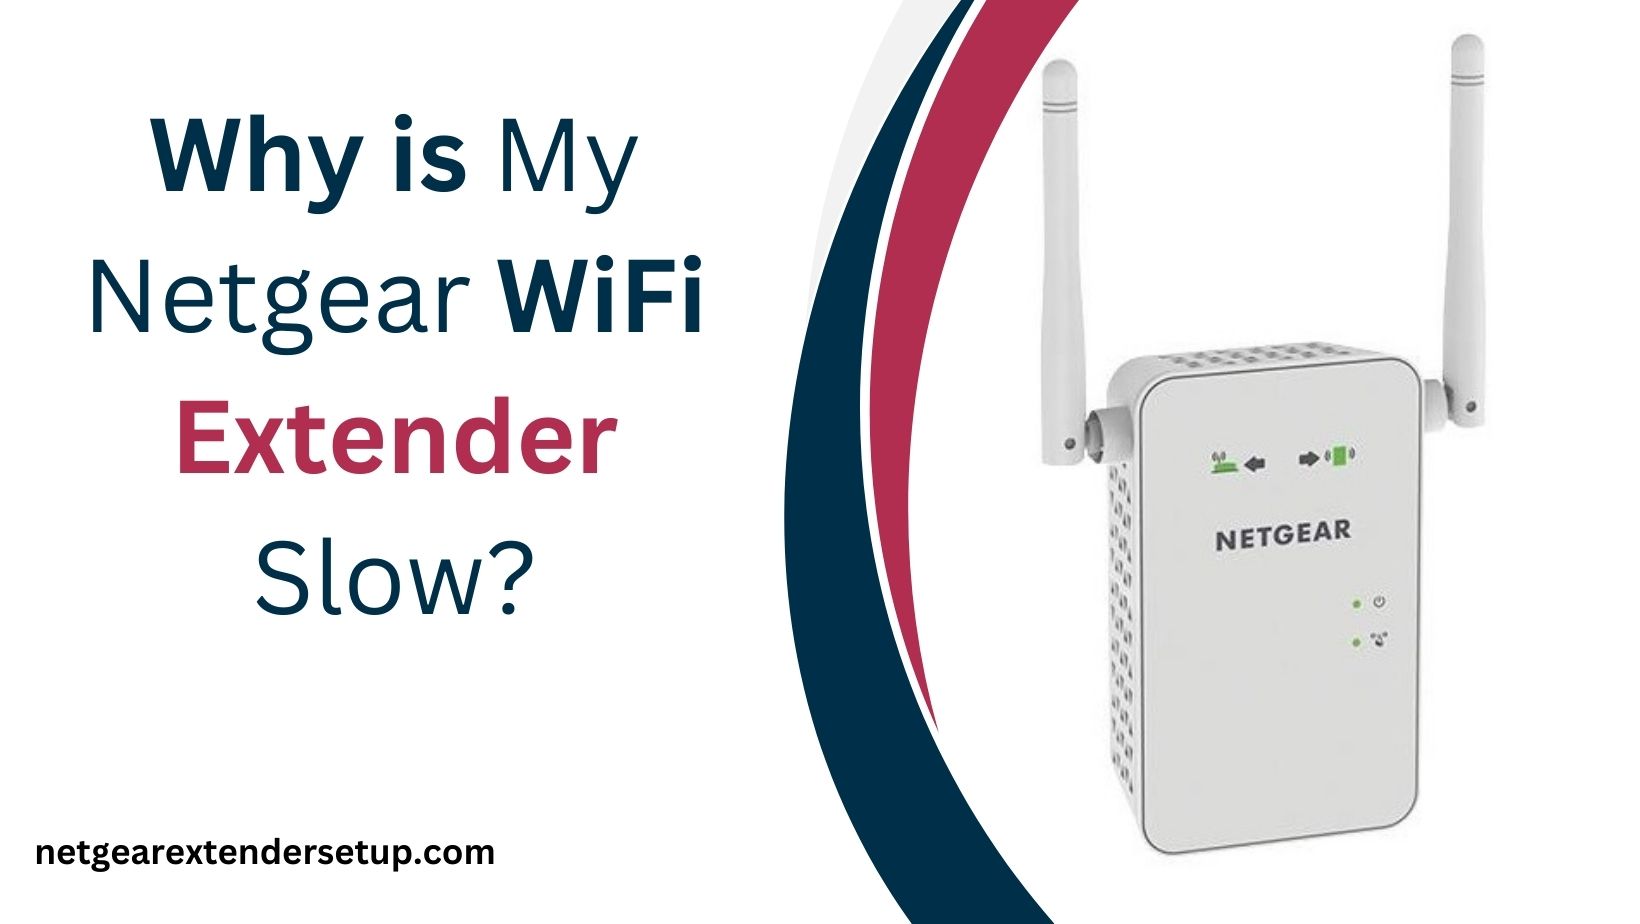 You are currently viewing Why is My Netgear WiFi Extender Slow?